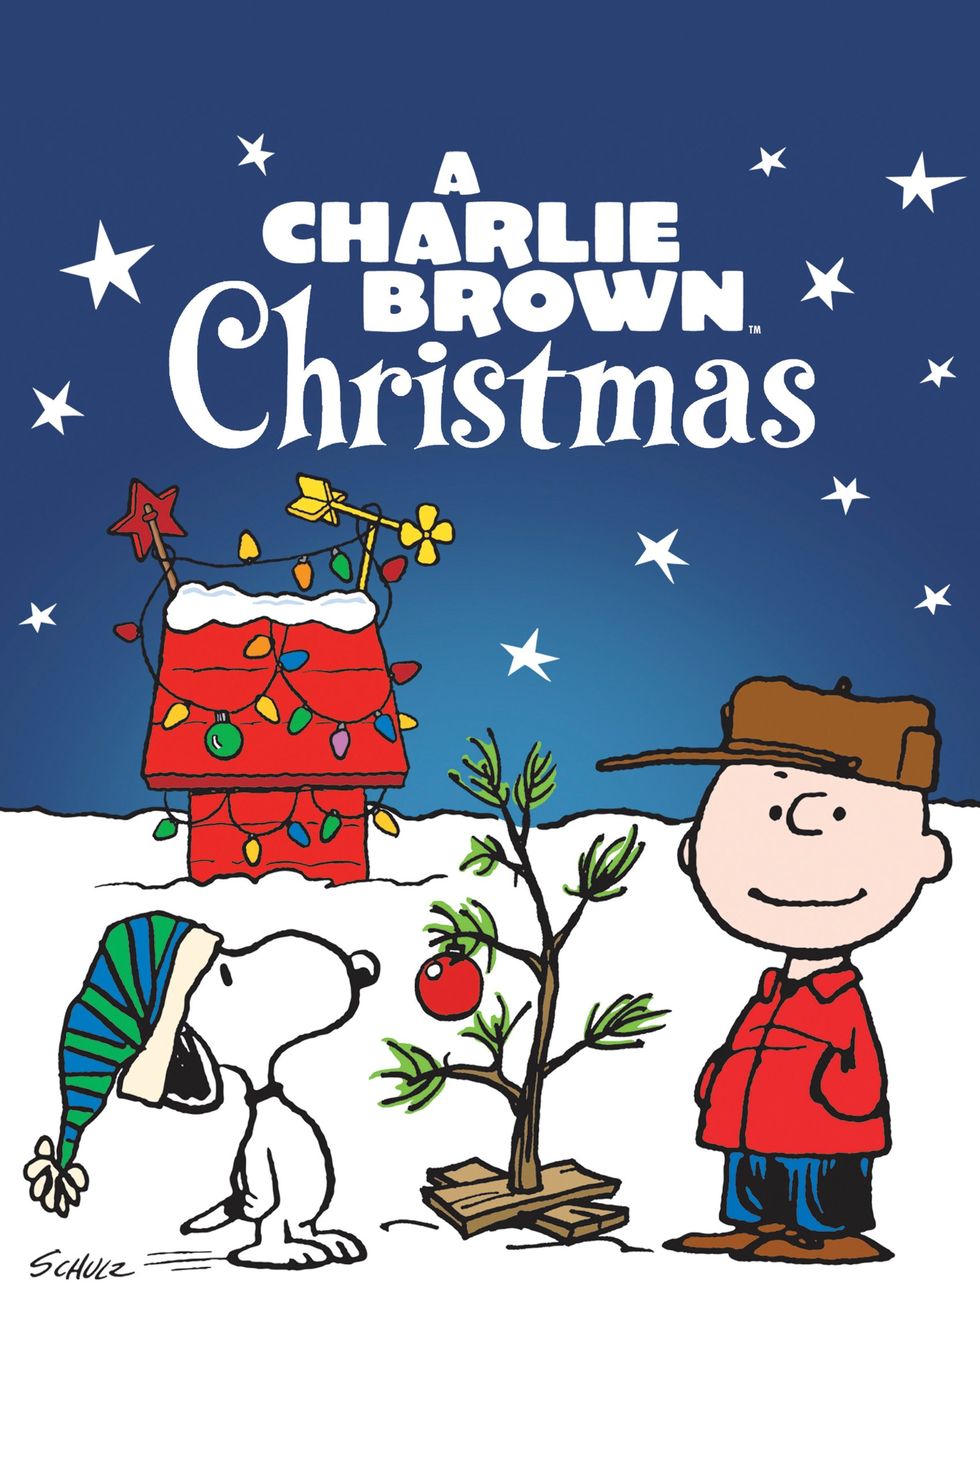 a charlie brown christmas - best christmas movies